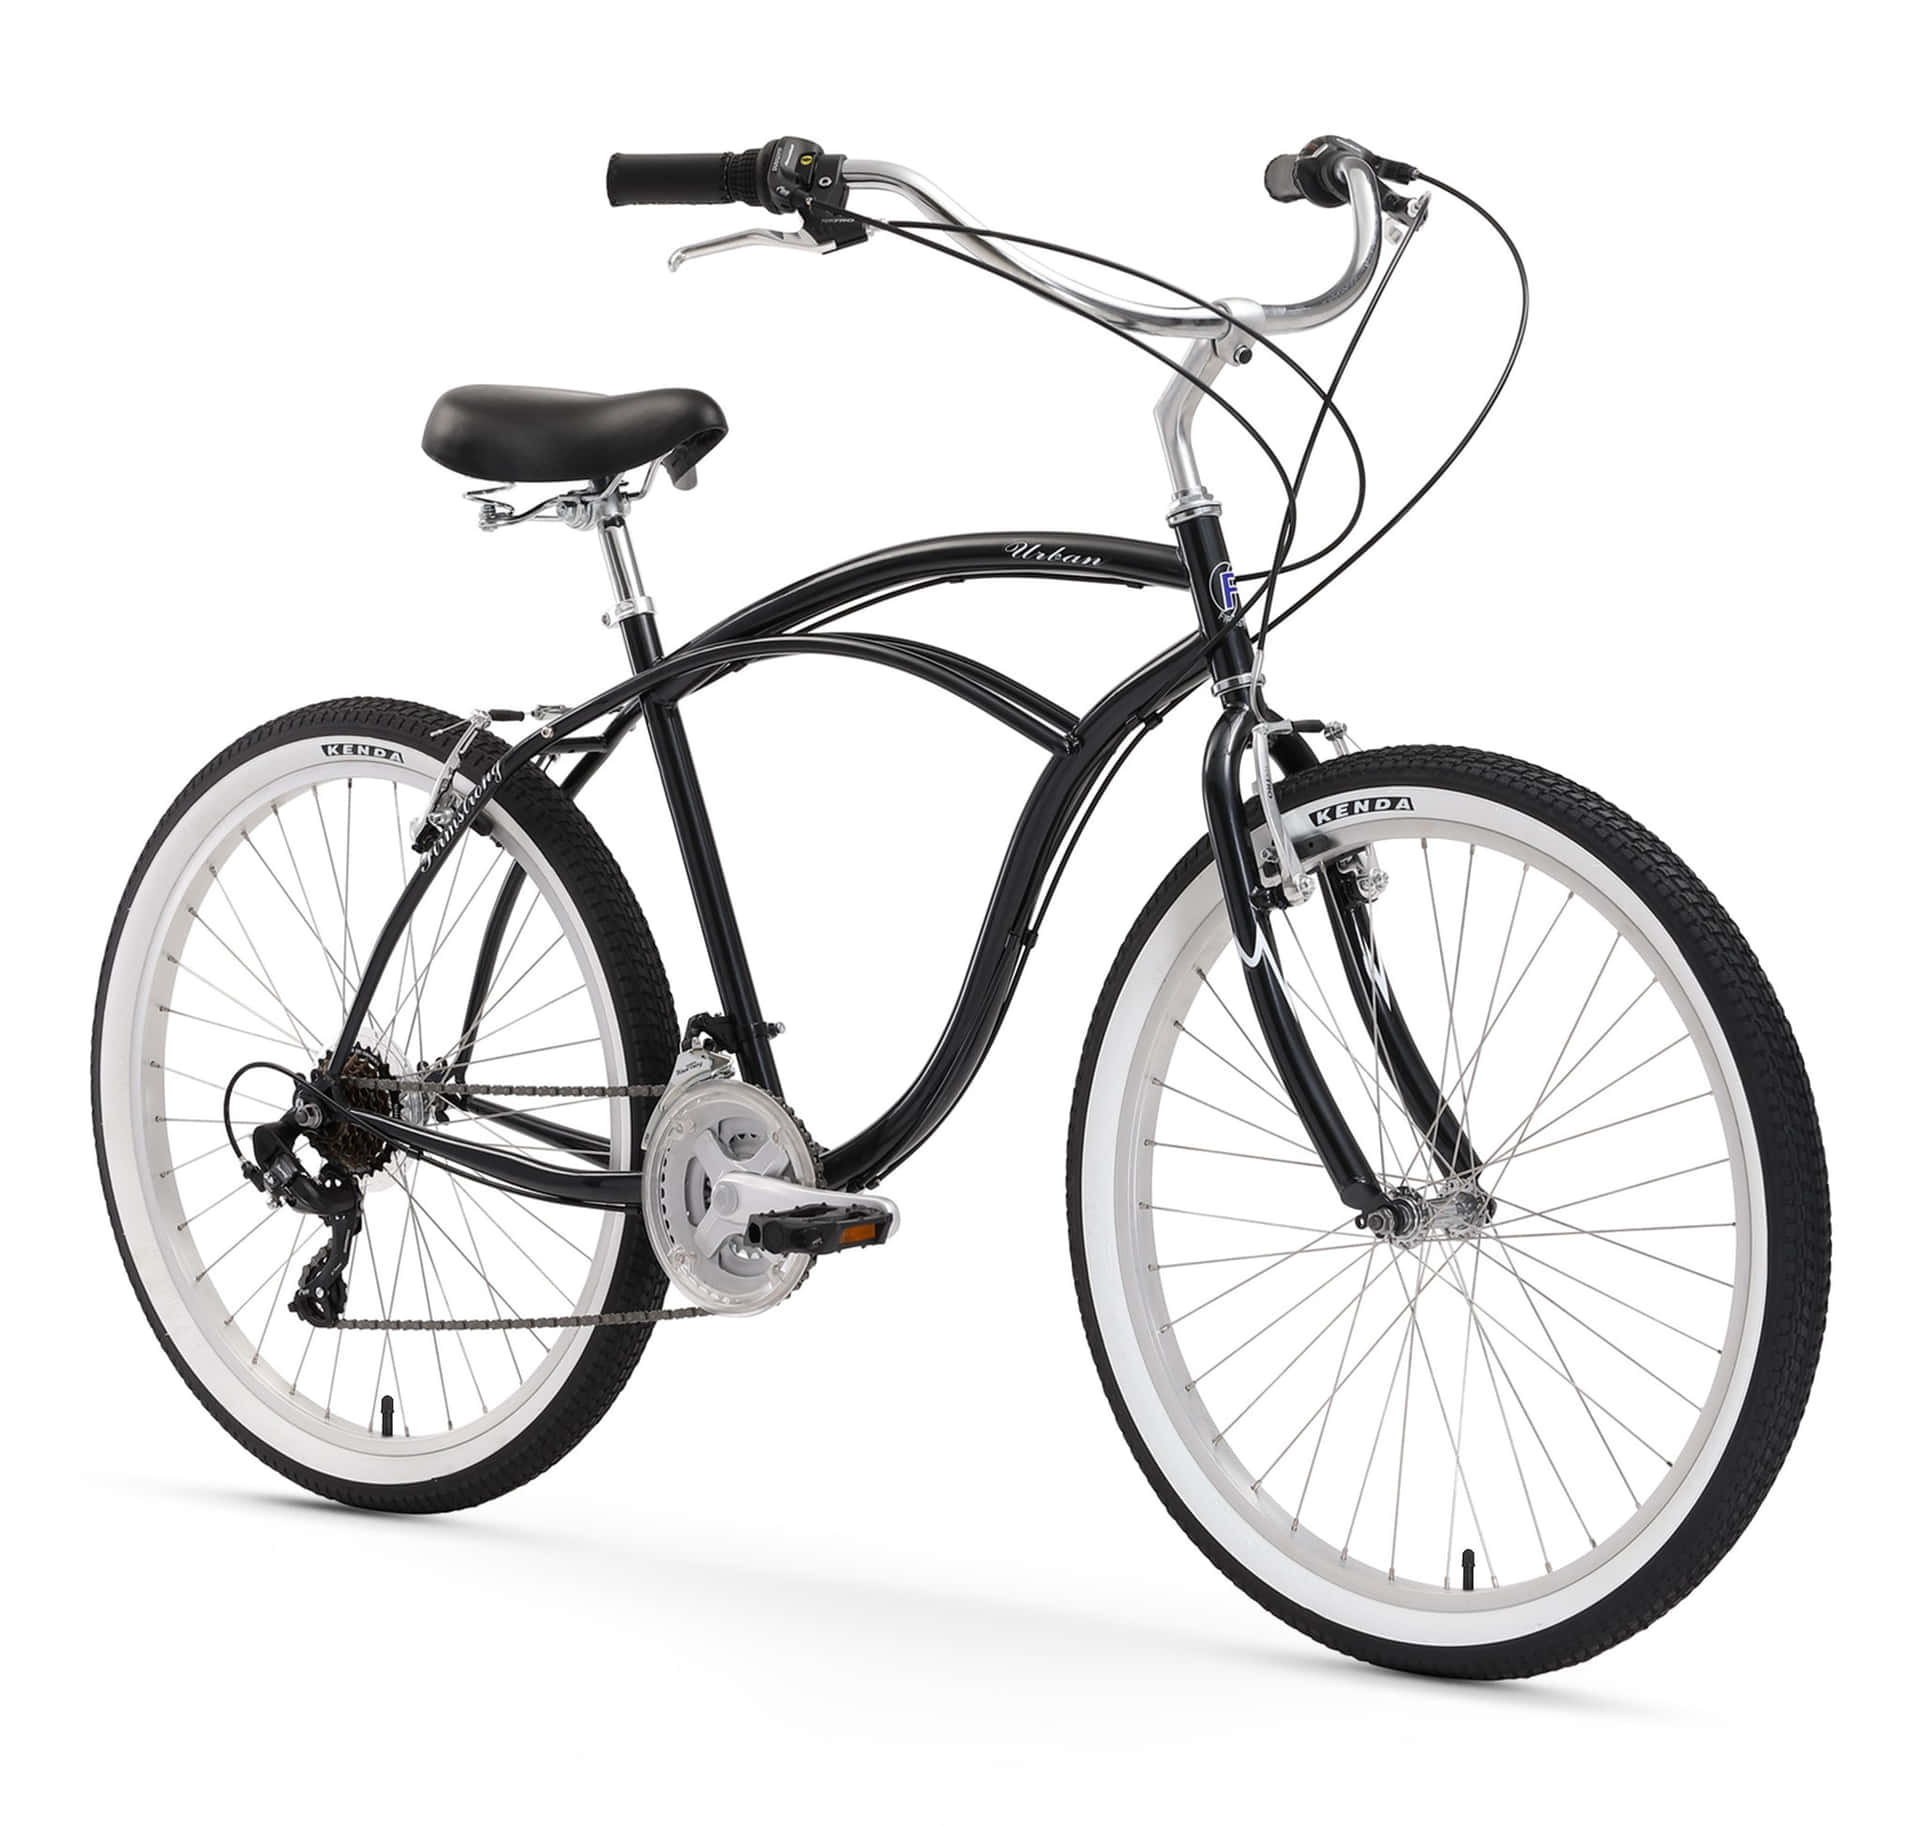 A Black And White Bicycle Is Shown Against A White Background